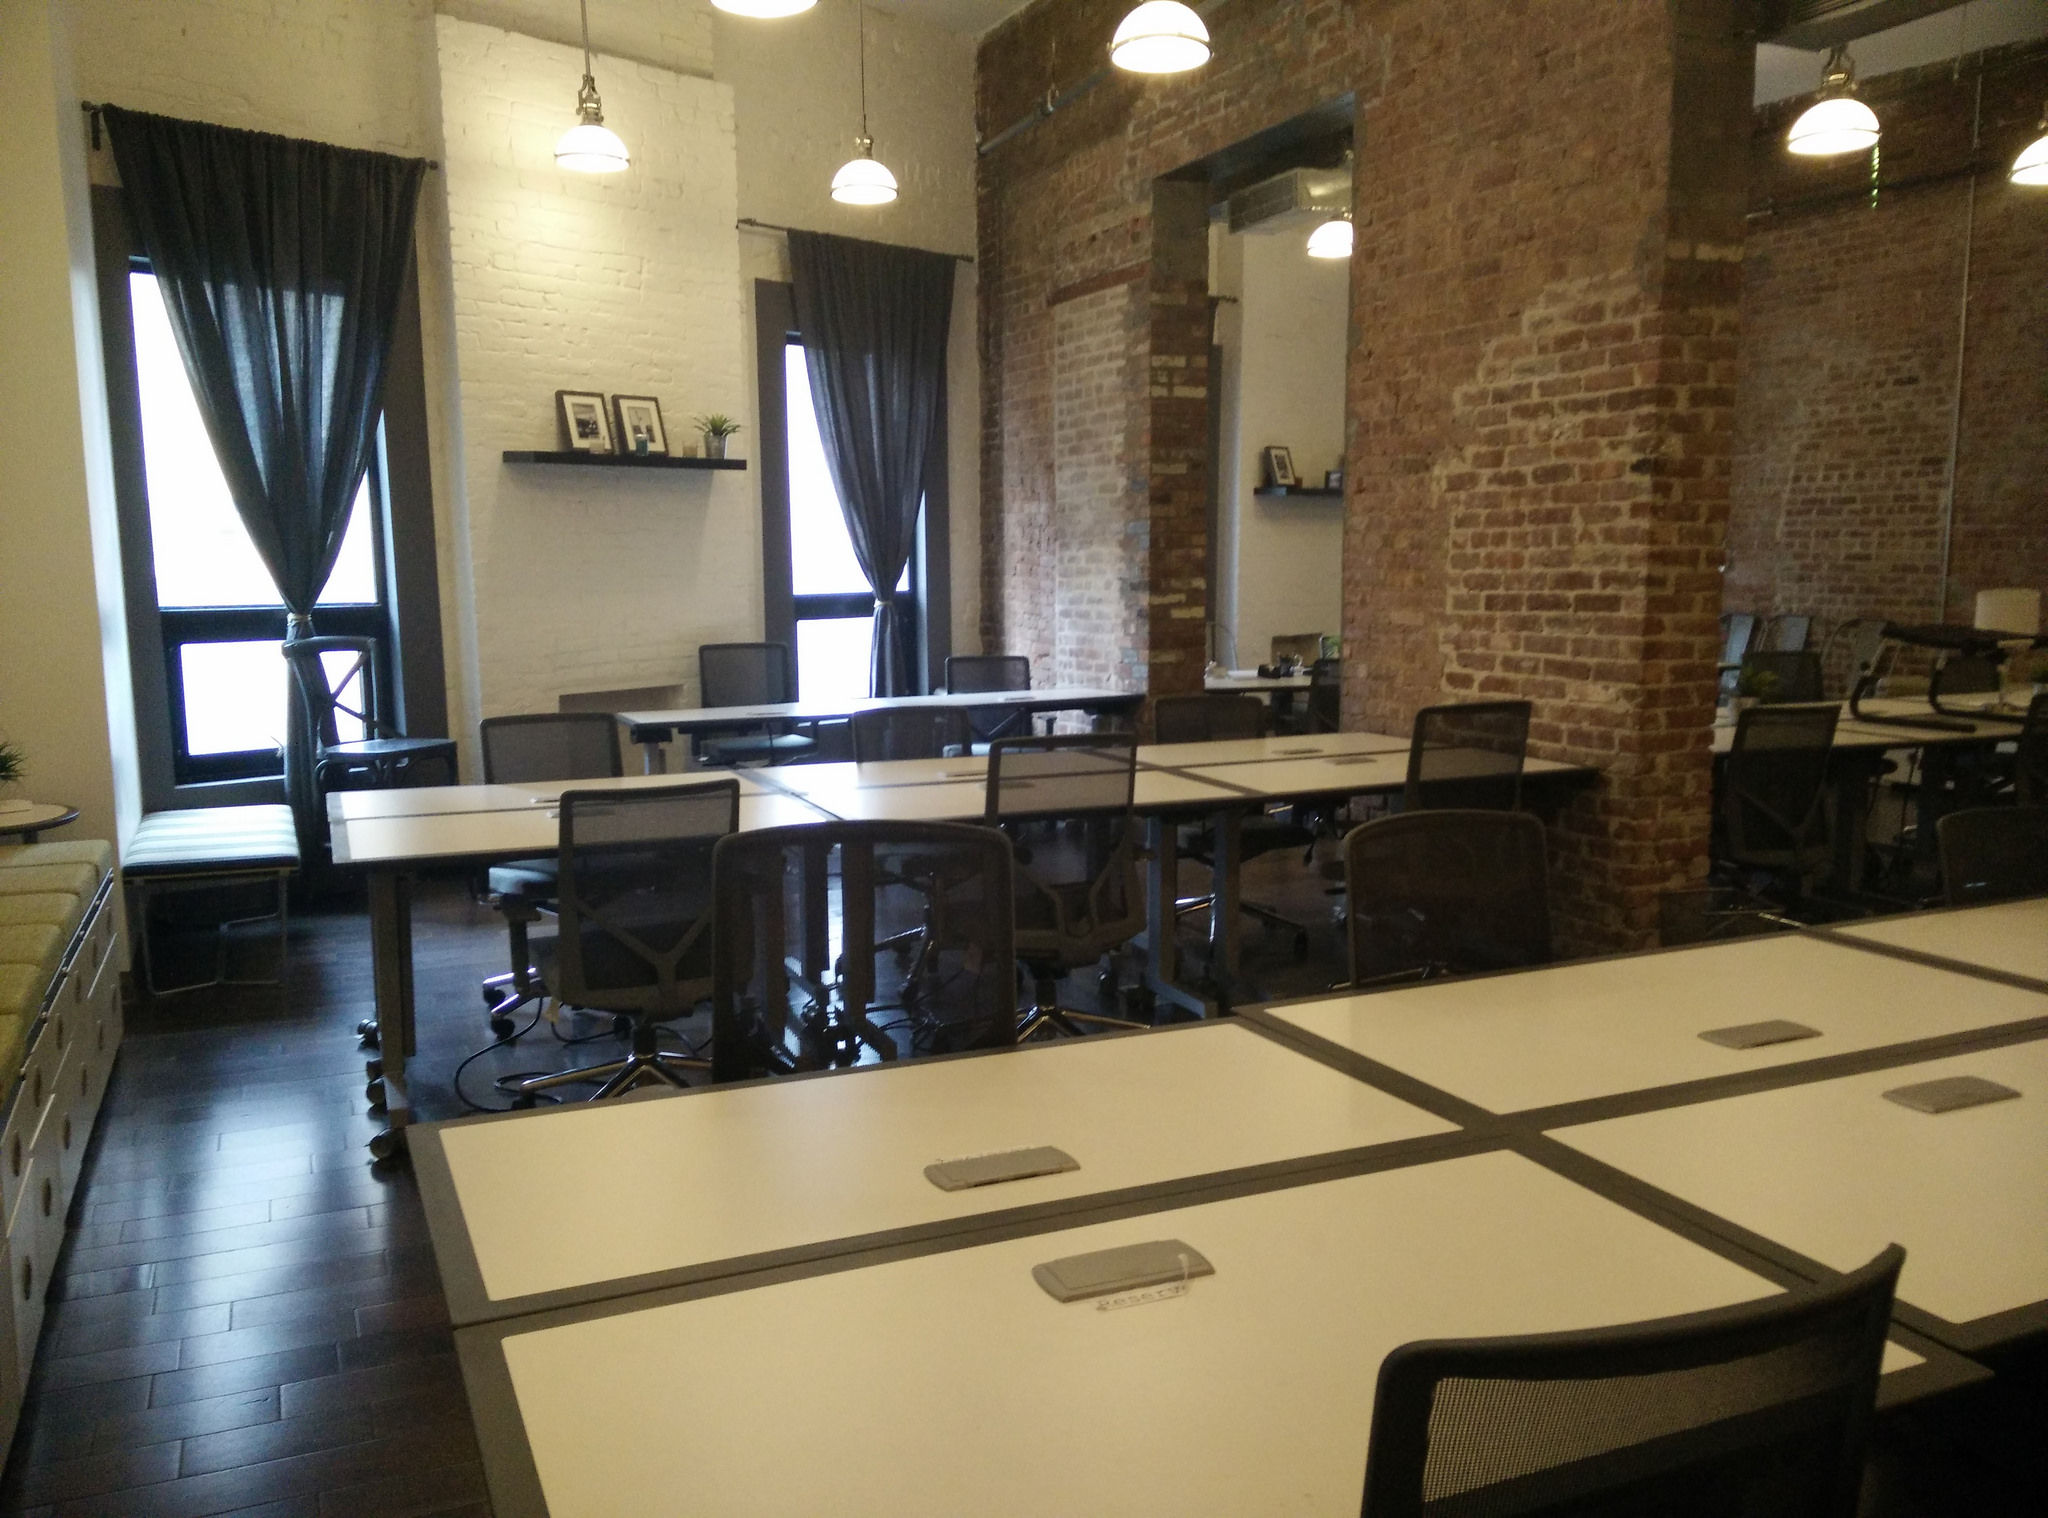 The Pros and Cons of a Coworking Space